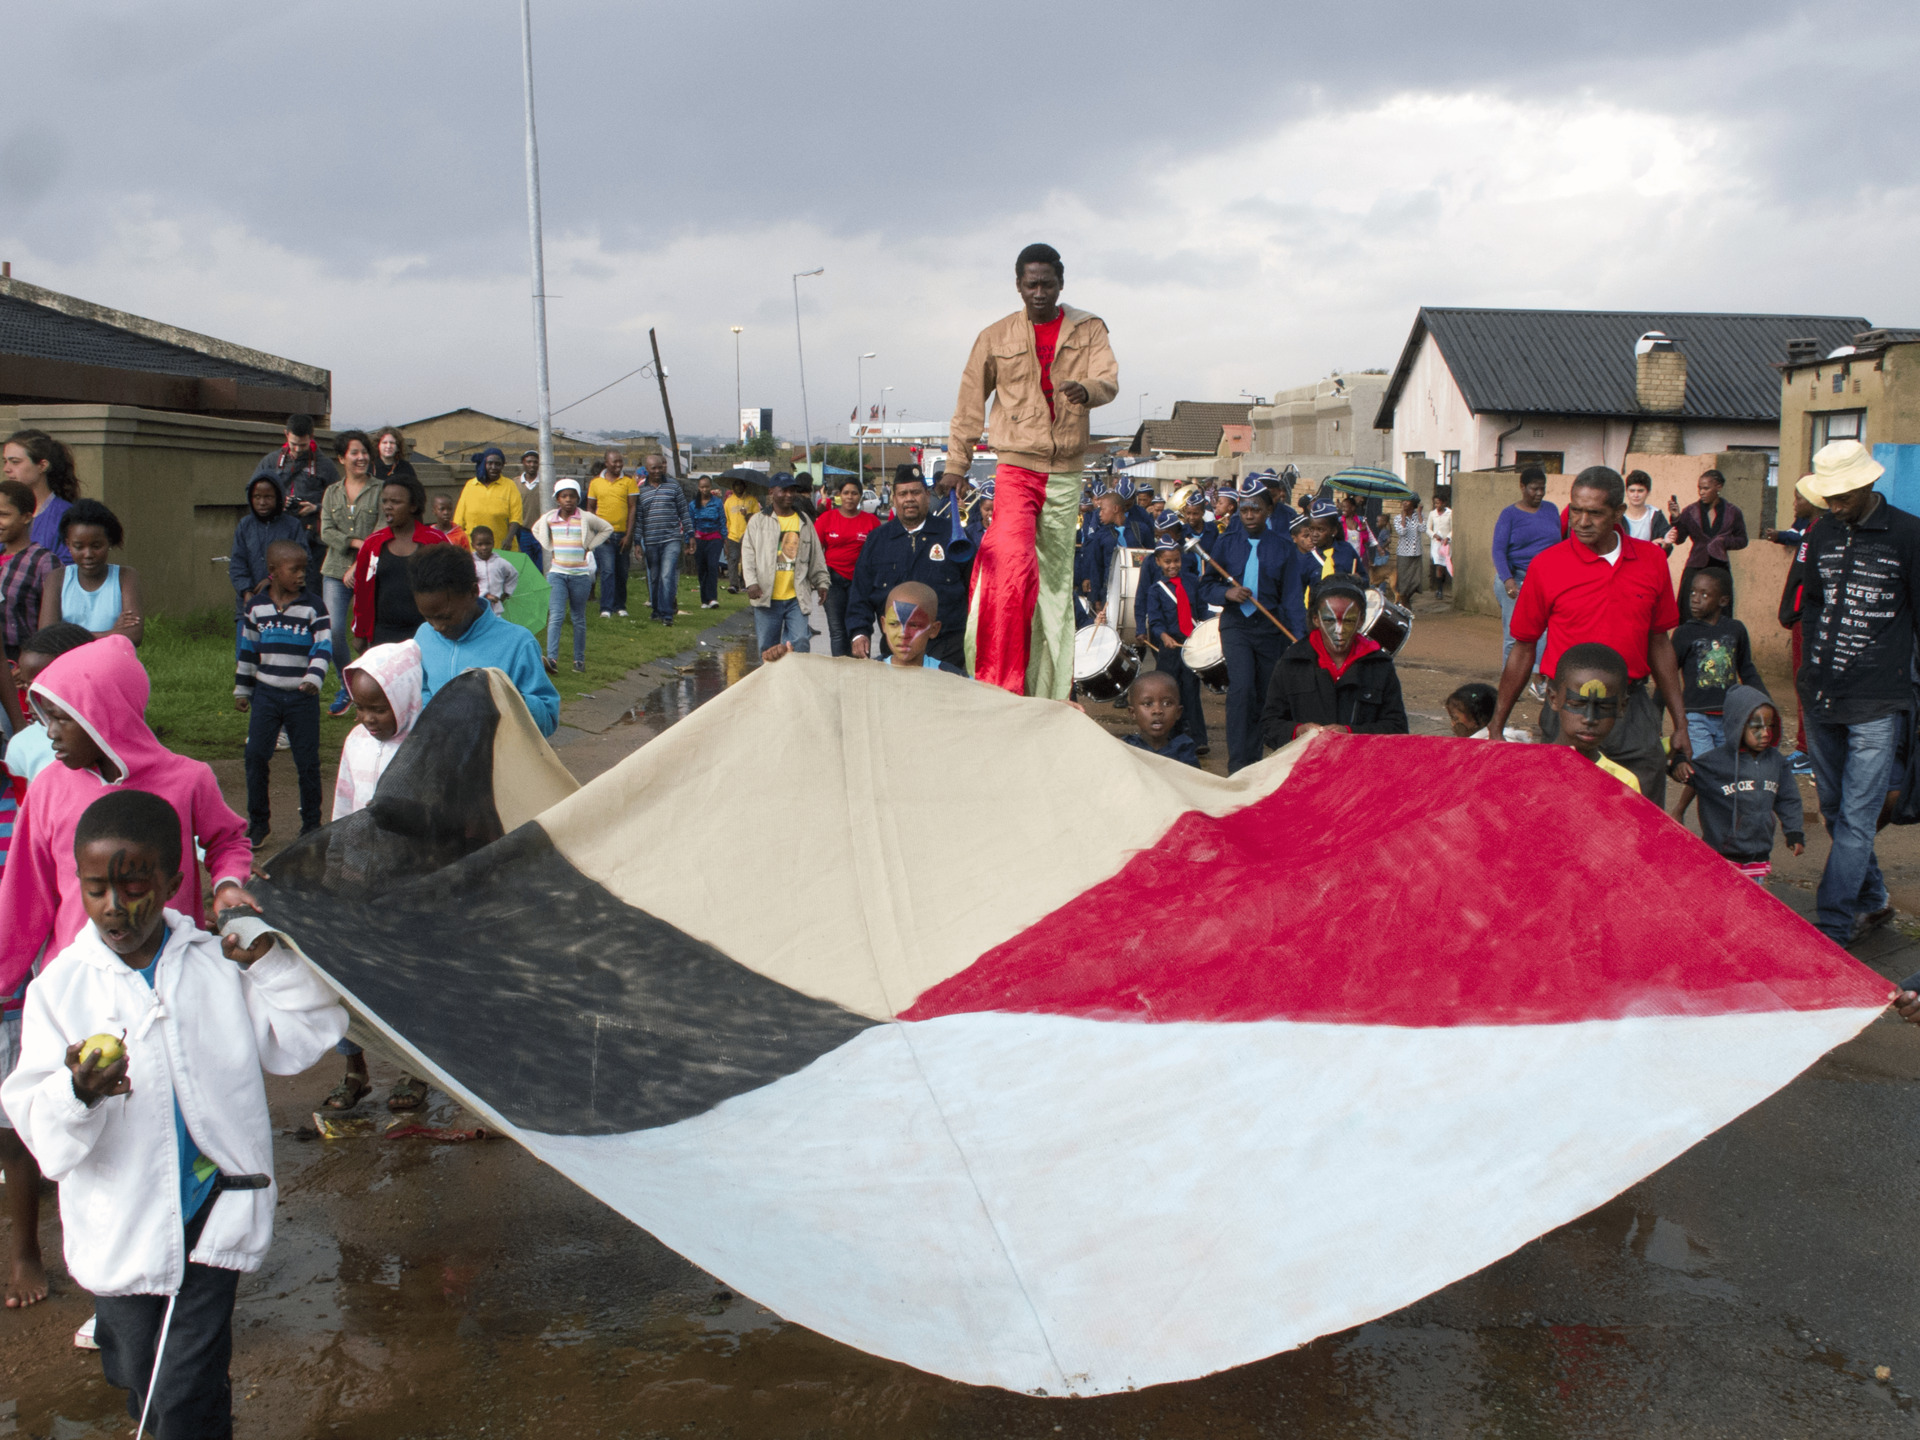 The Soweto Street Festival co-organized by students of Design for the Living World and local community